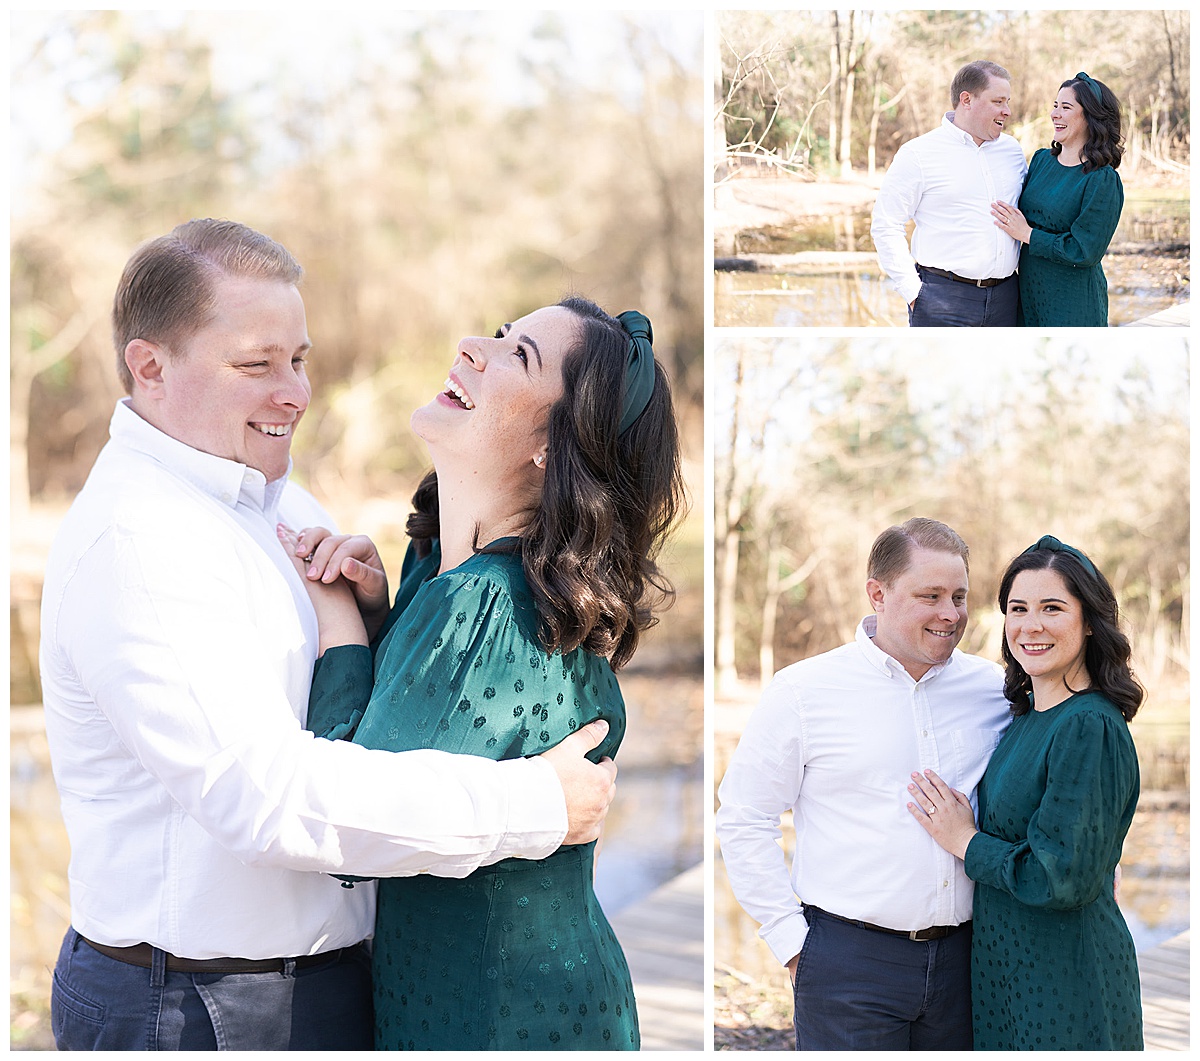 Two people smile and laugh together for Houston’s Best Wedding Photographers